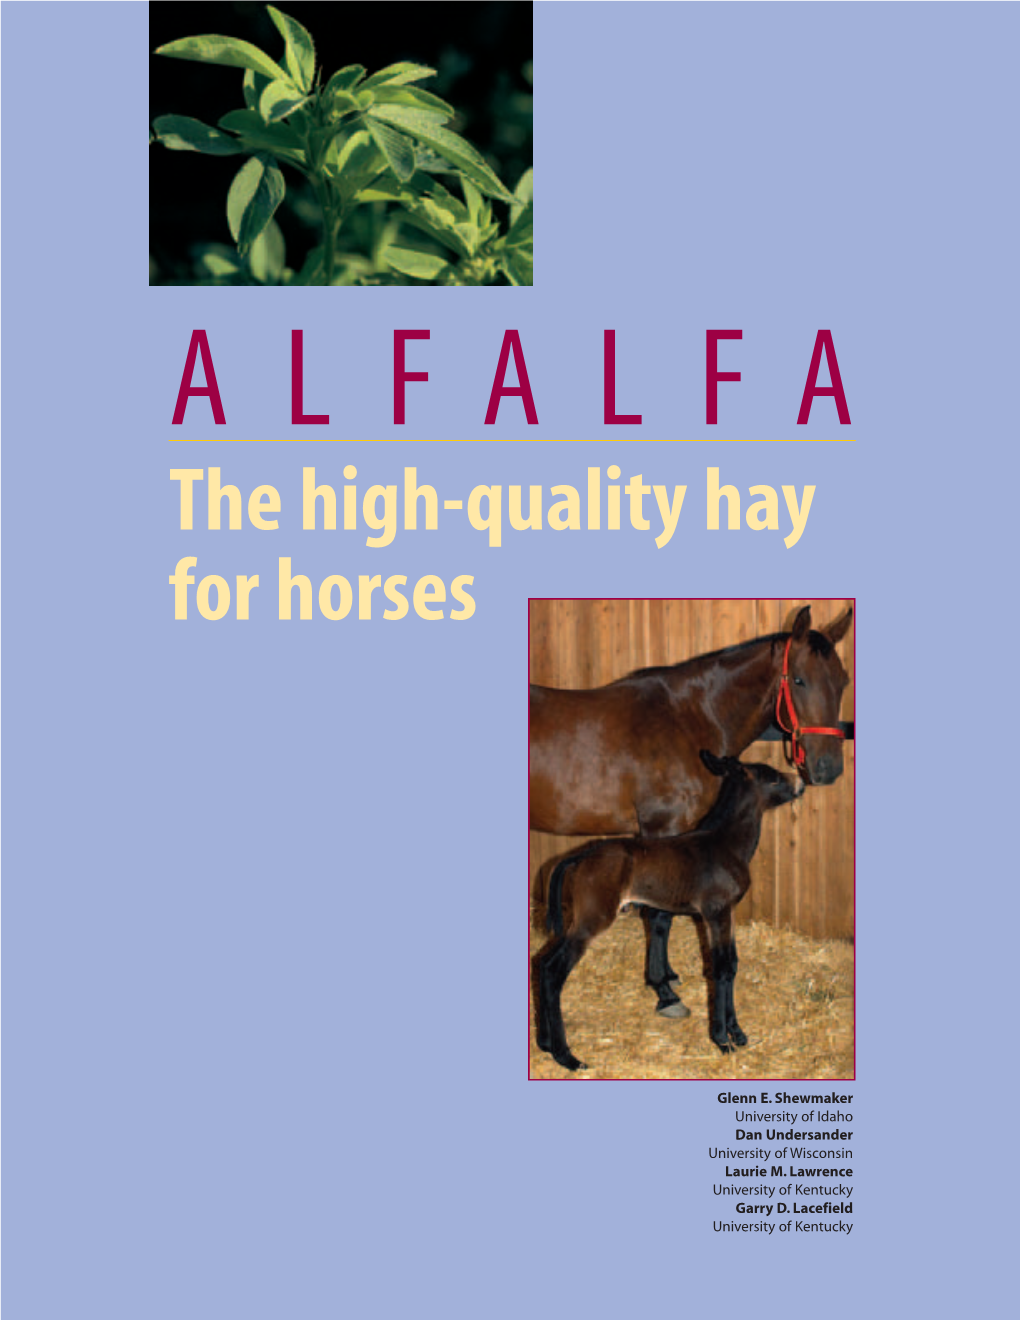 The High-Quality Hay for Horses